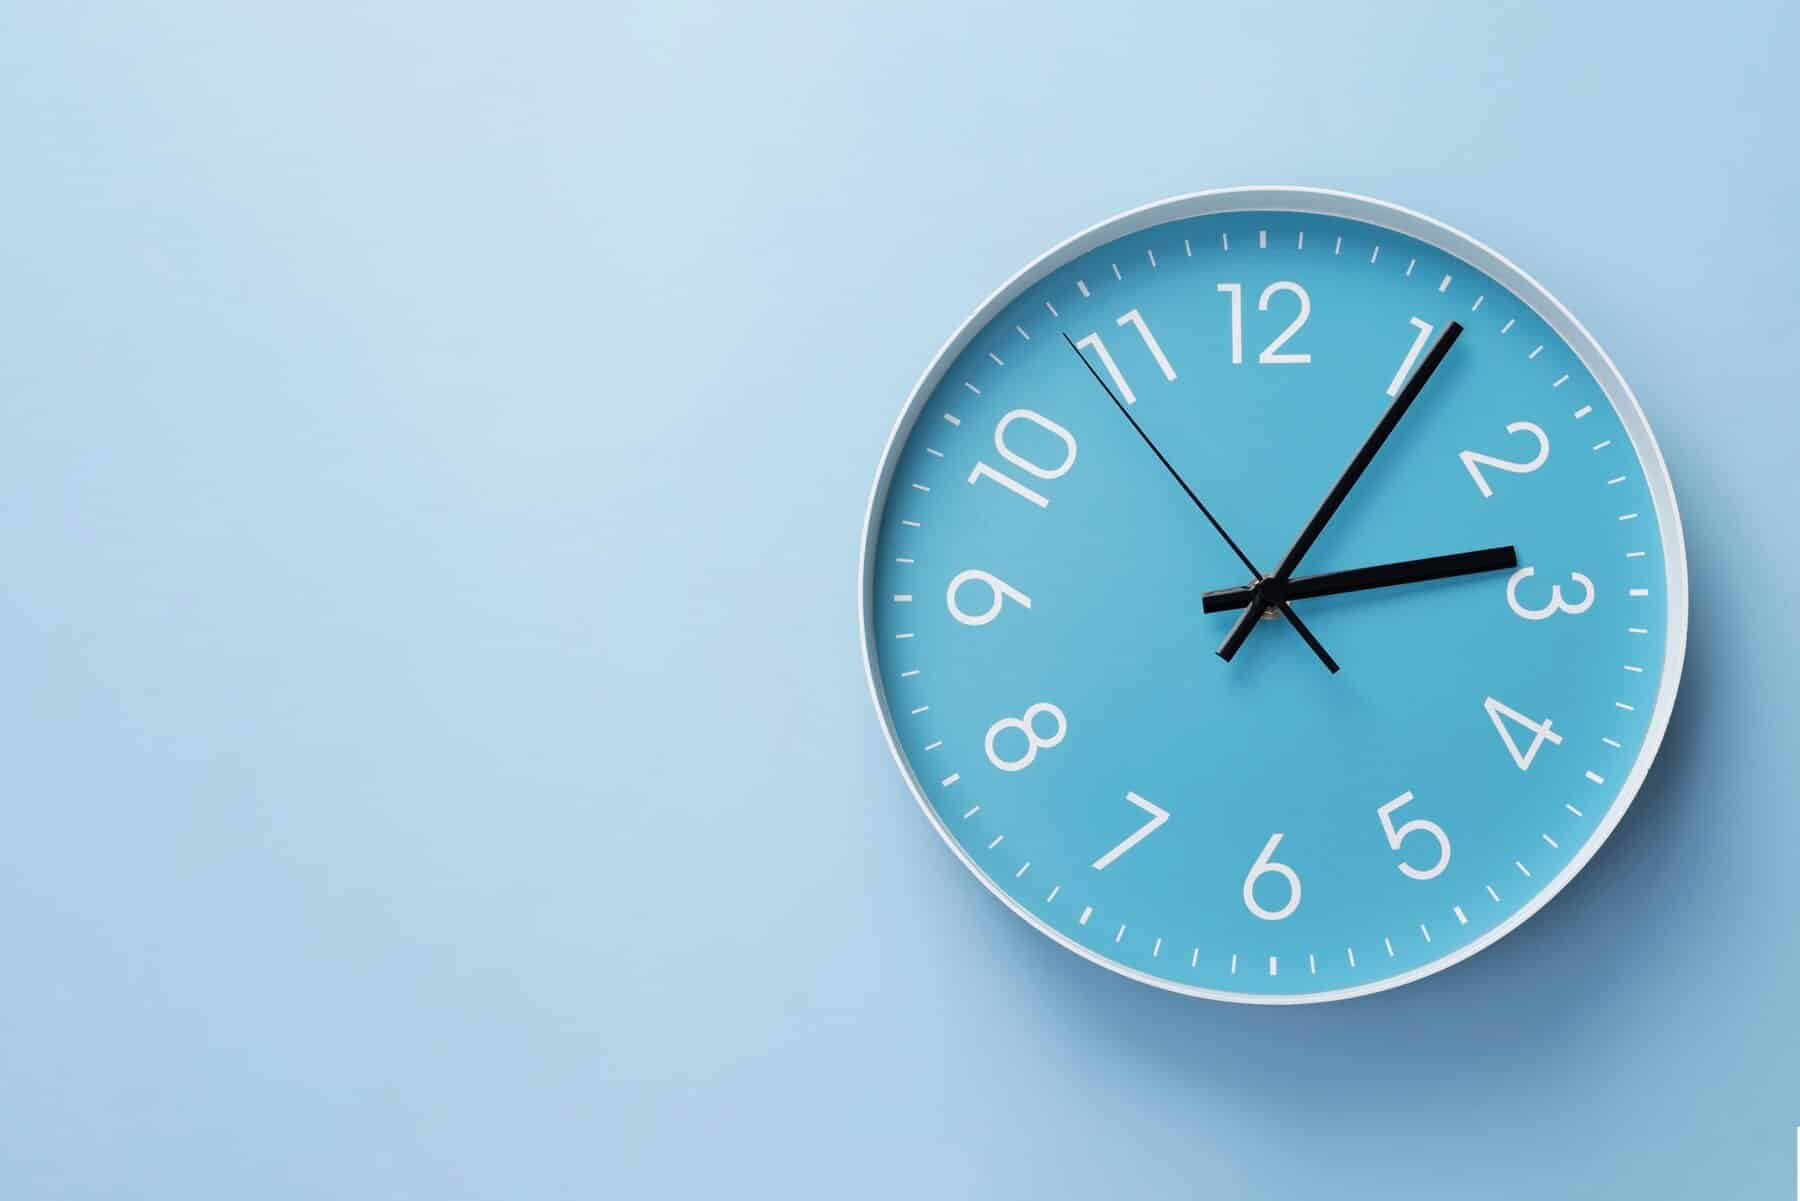 5 cyber security myths, the importance of time synchronization, and more